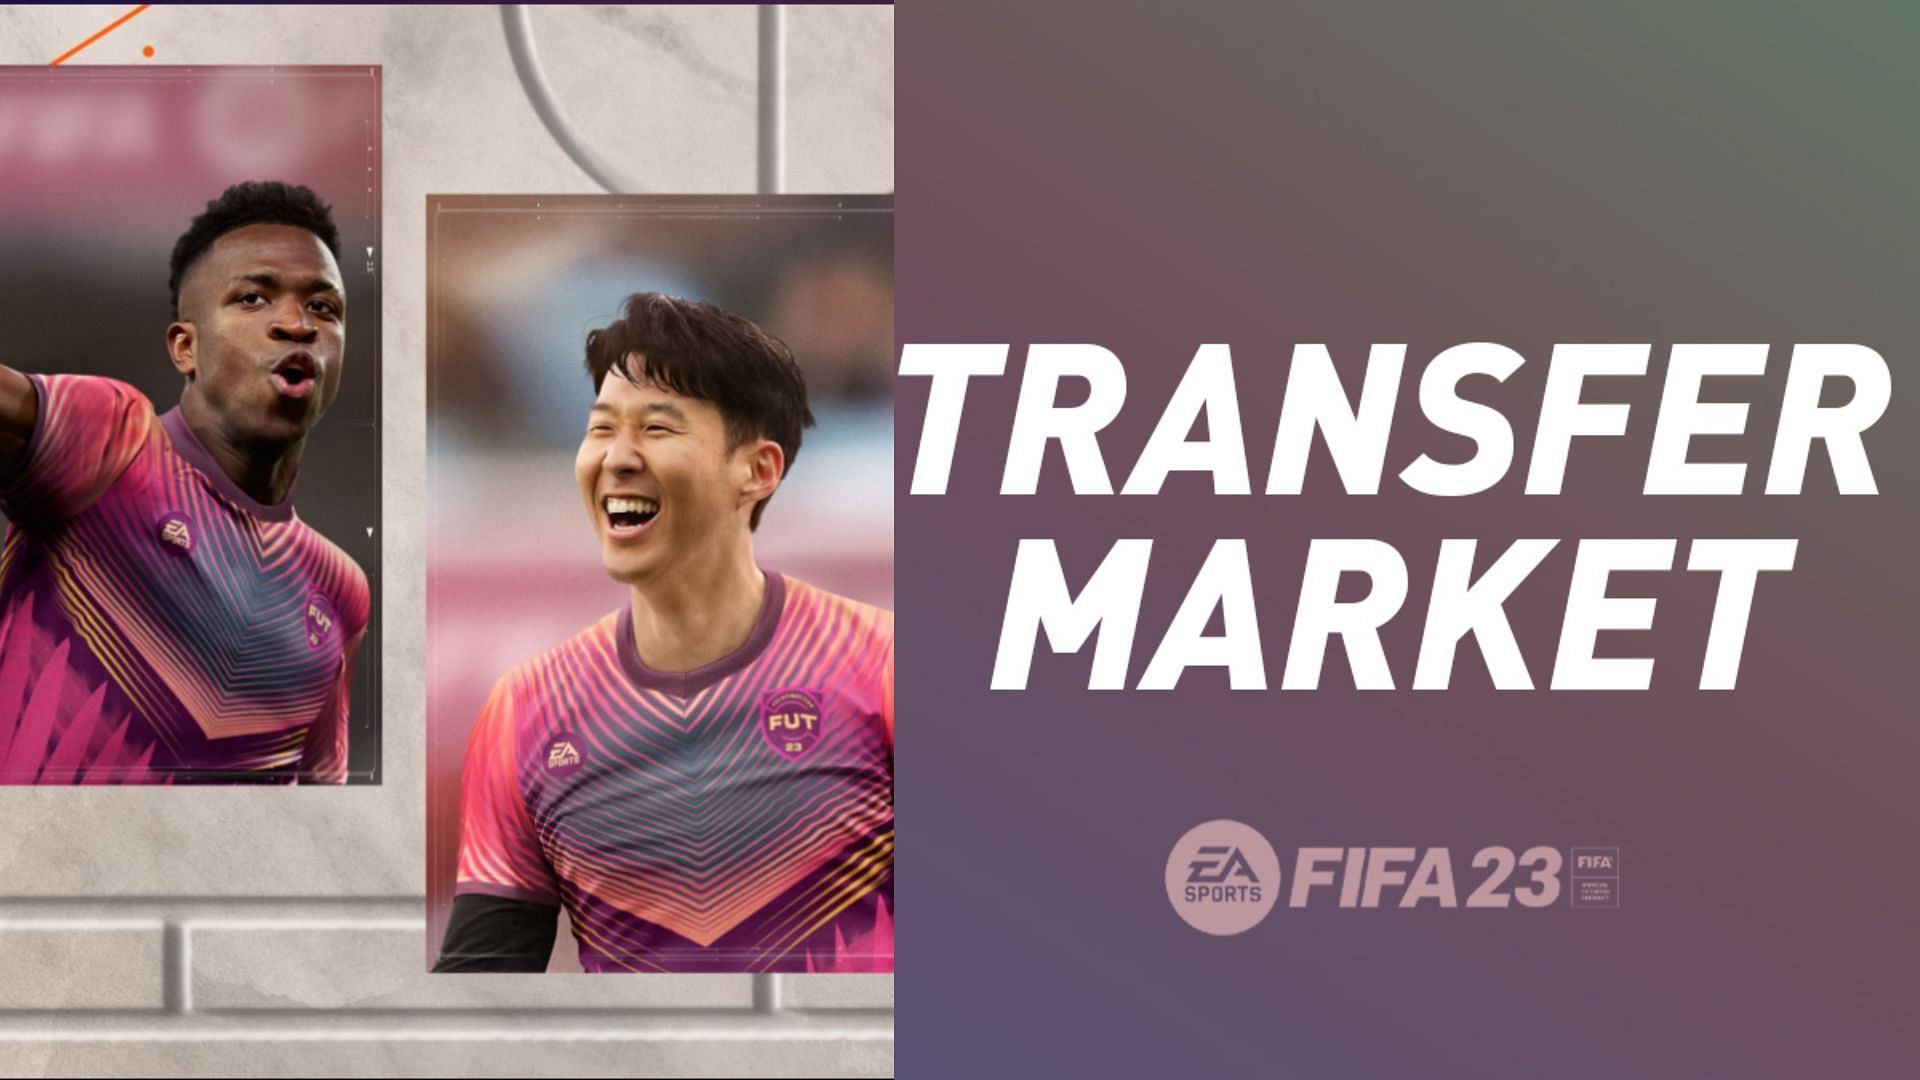 FUT Web App - Track your FIFA 23 Ultimate Team on the go